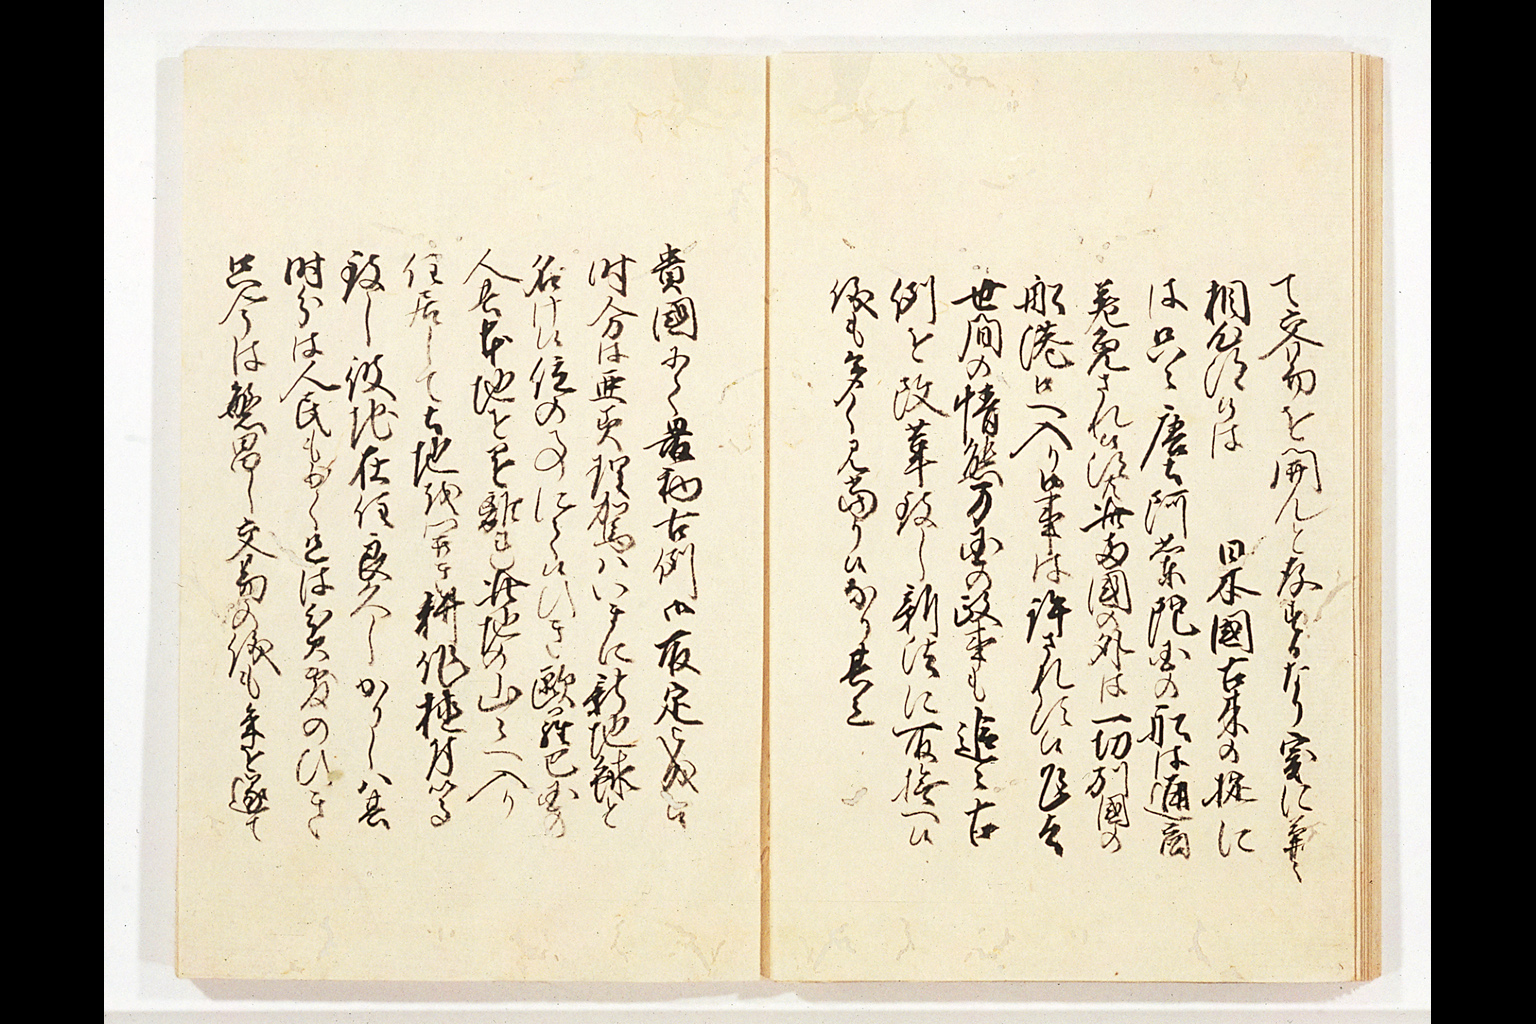 "Gasshukoku Shokan Wage" ('Translations of Letters from the United States [President]')(larger)